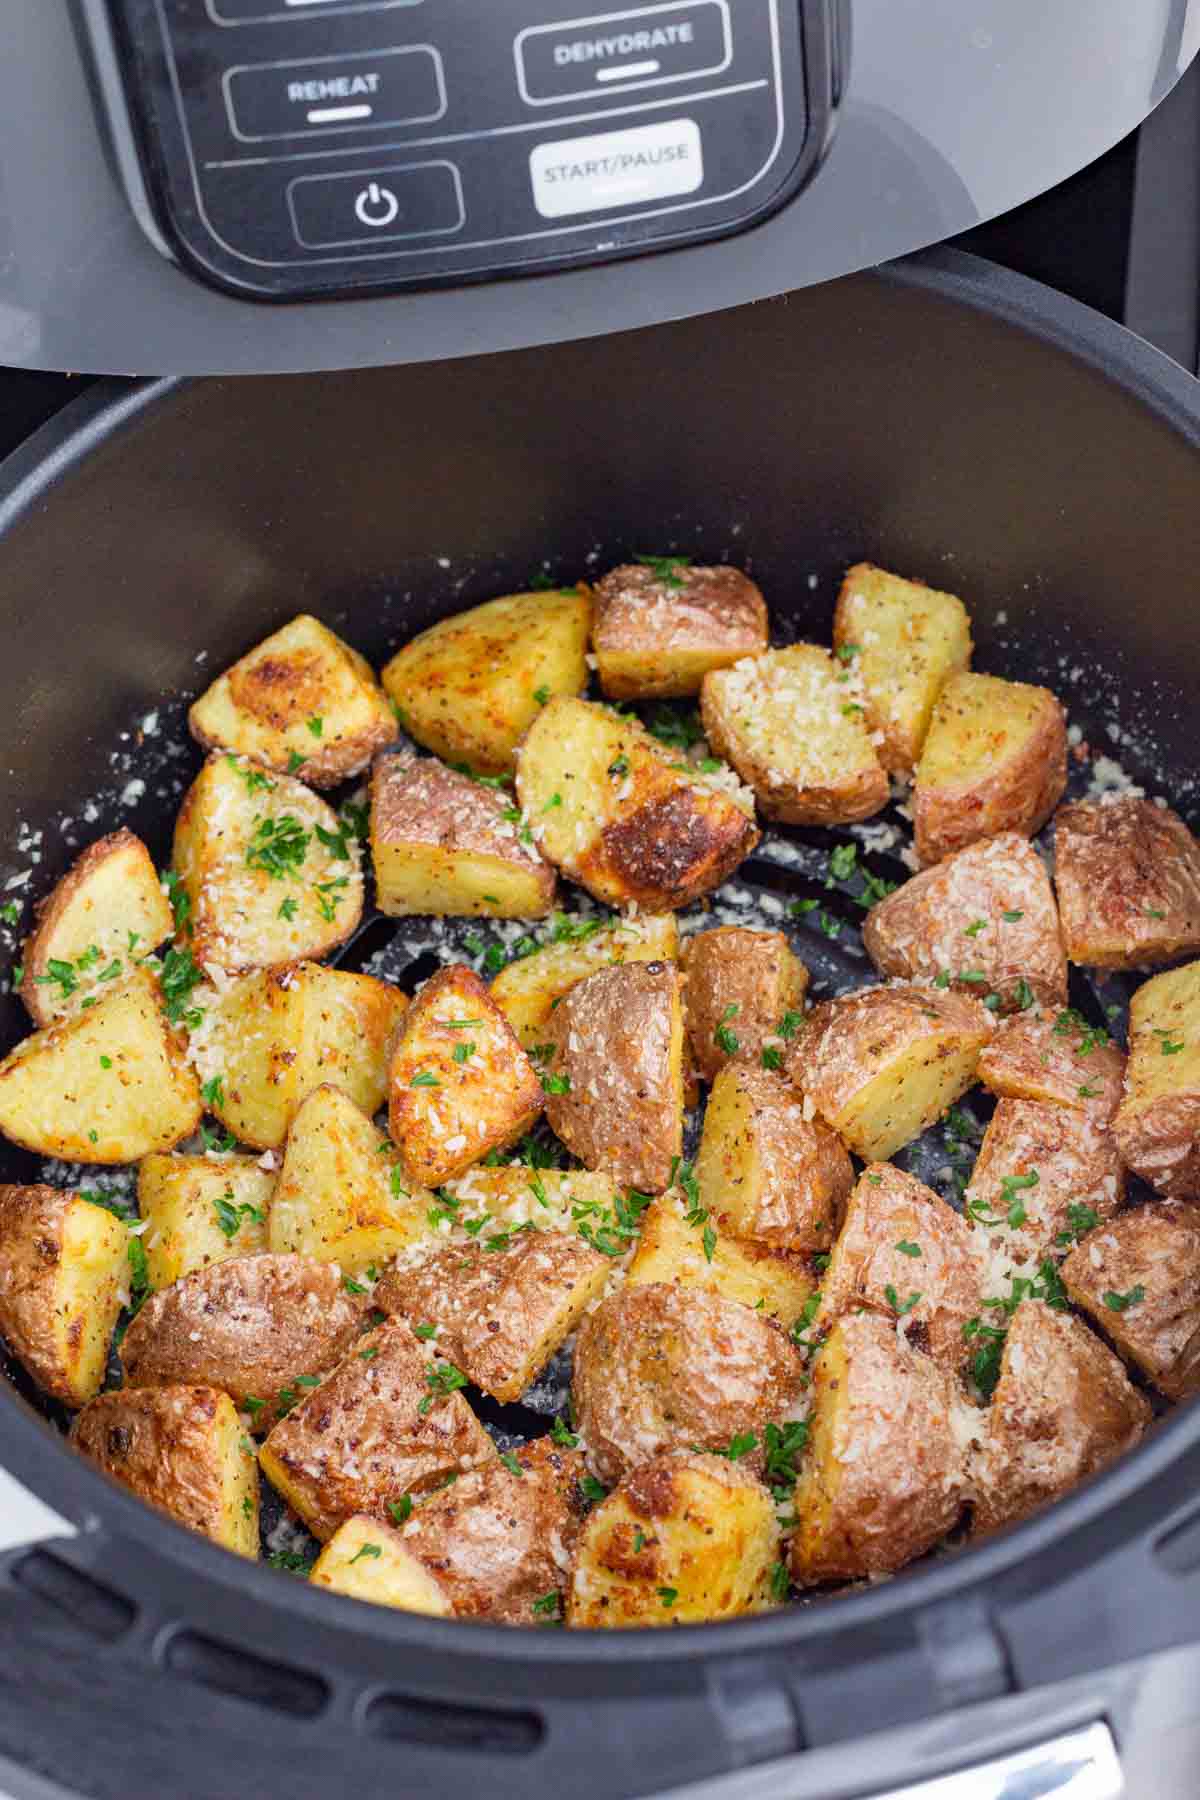 Roasted potatoes are cooked in the air fryer to save time.